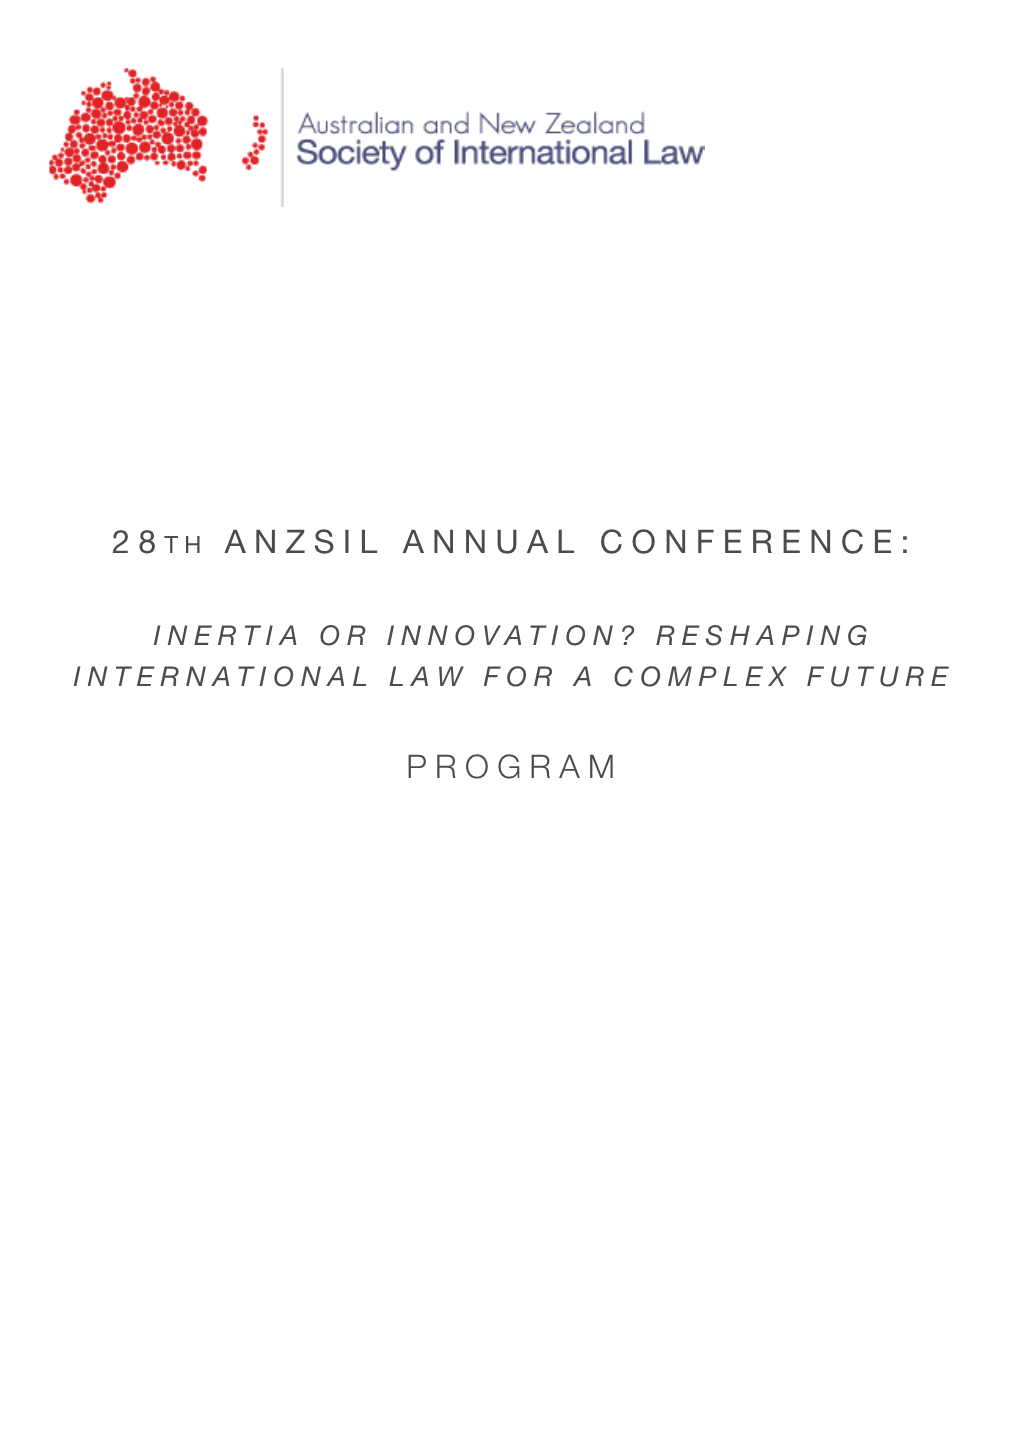 2 8 T H Anzsil Annual Conference: Program